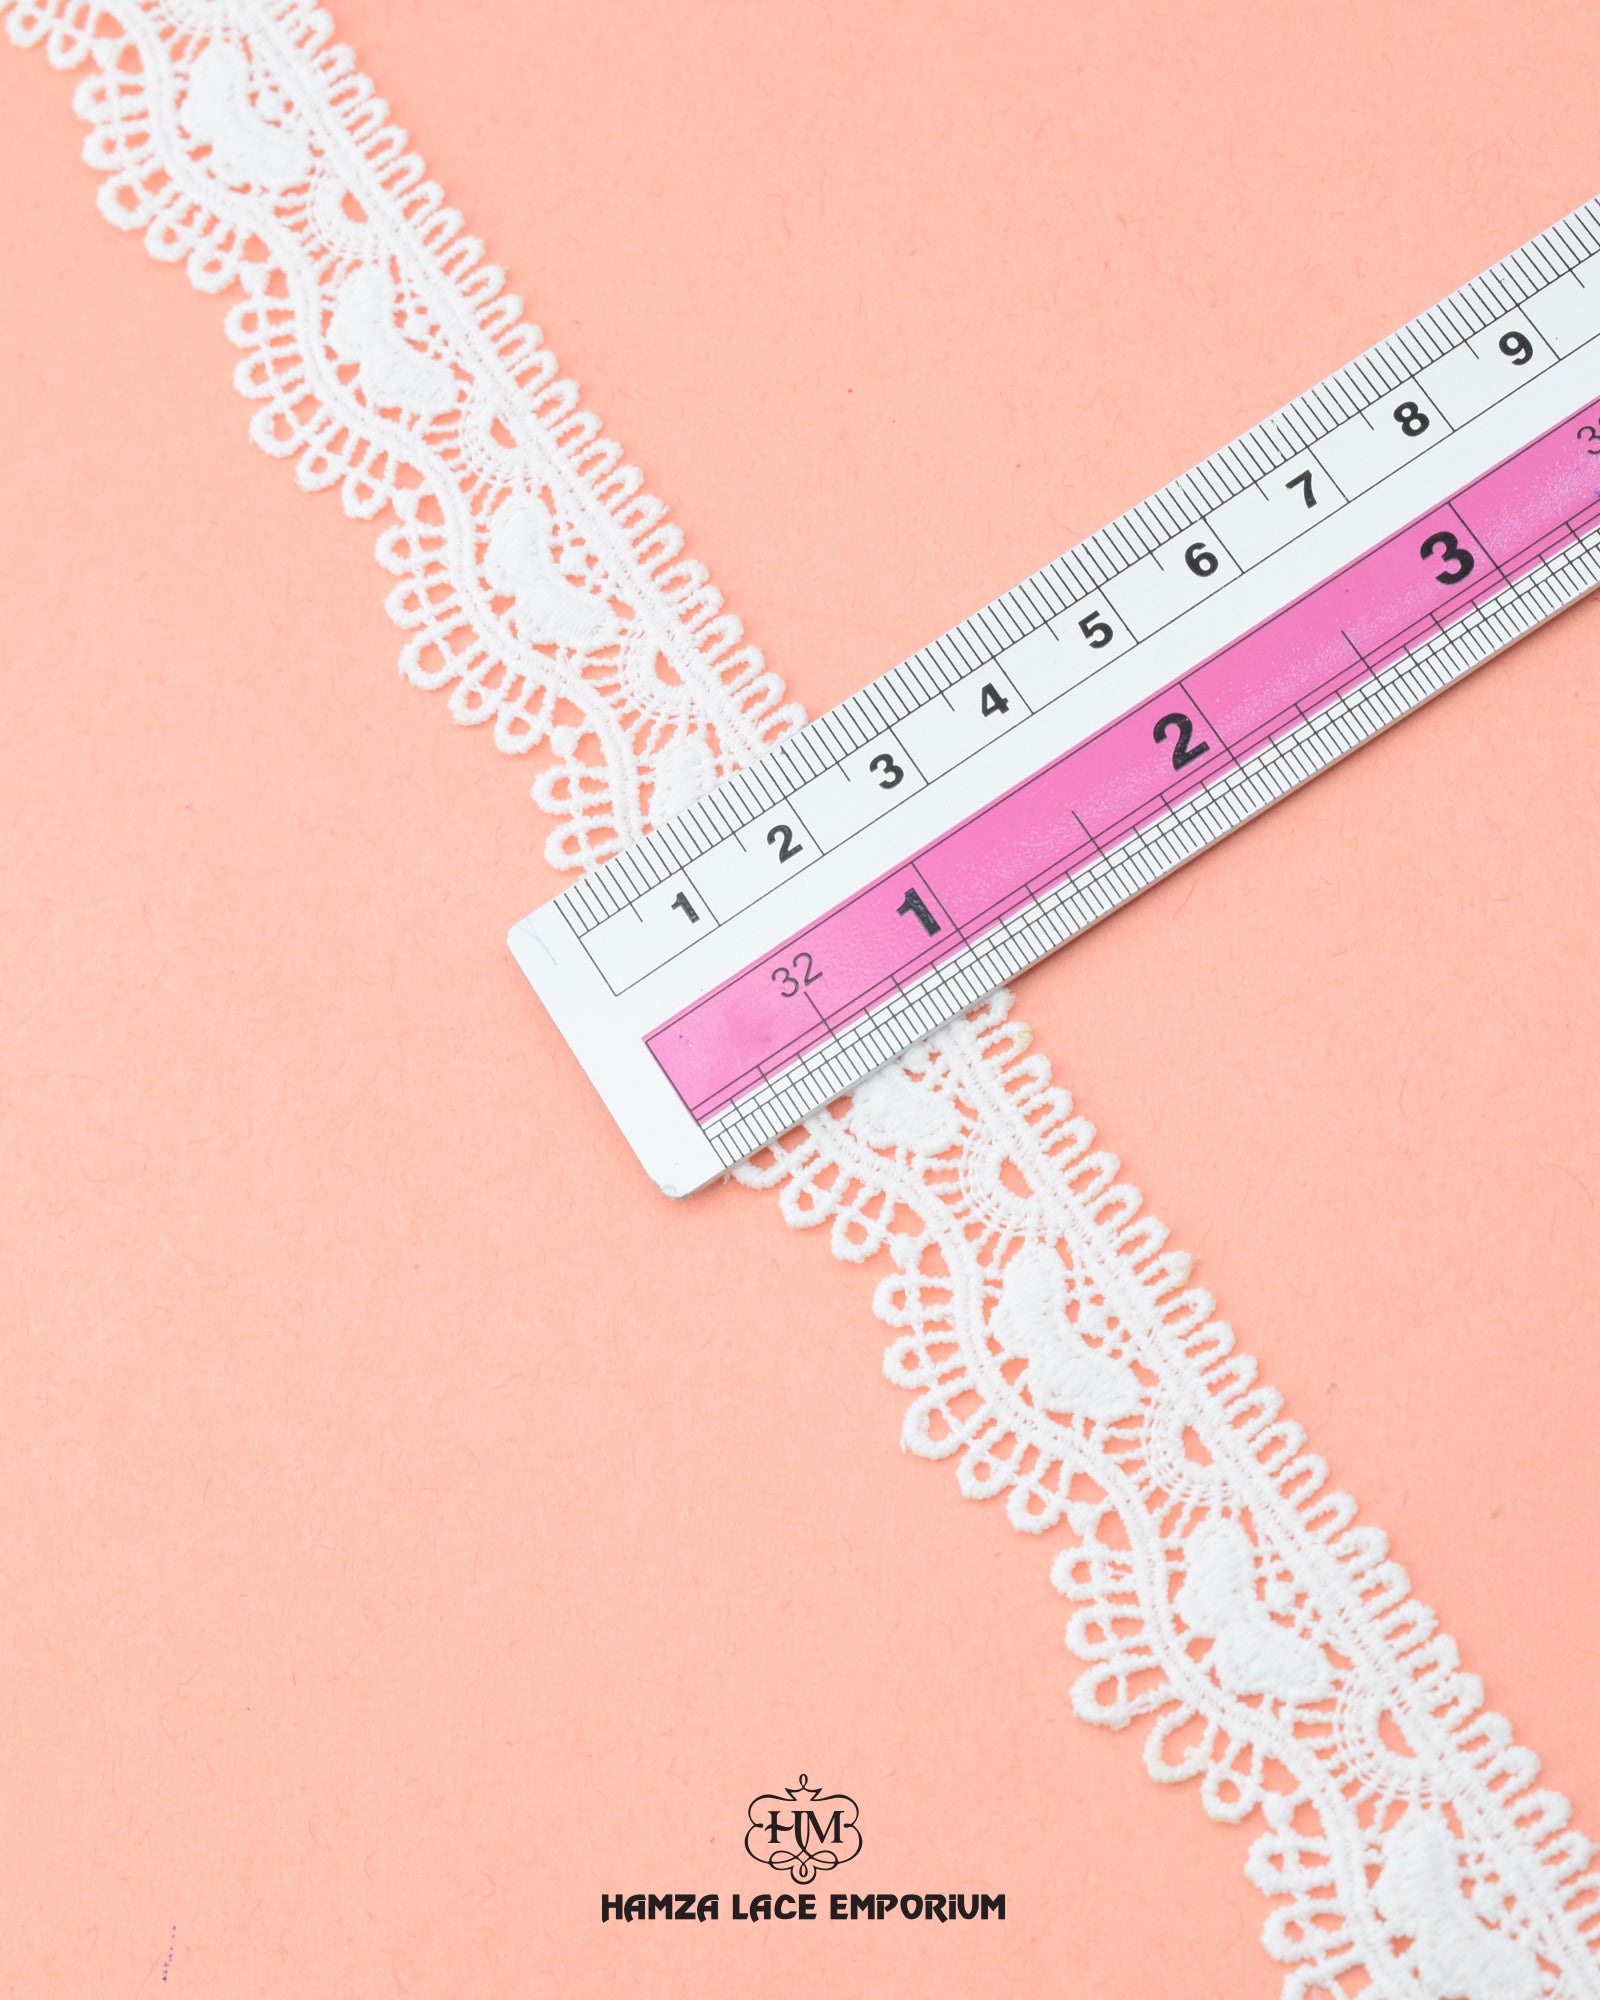 Size of the 'Edging Lace 3533' is shown as '1' inch with the help of a ruler